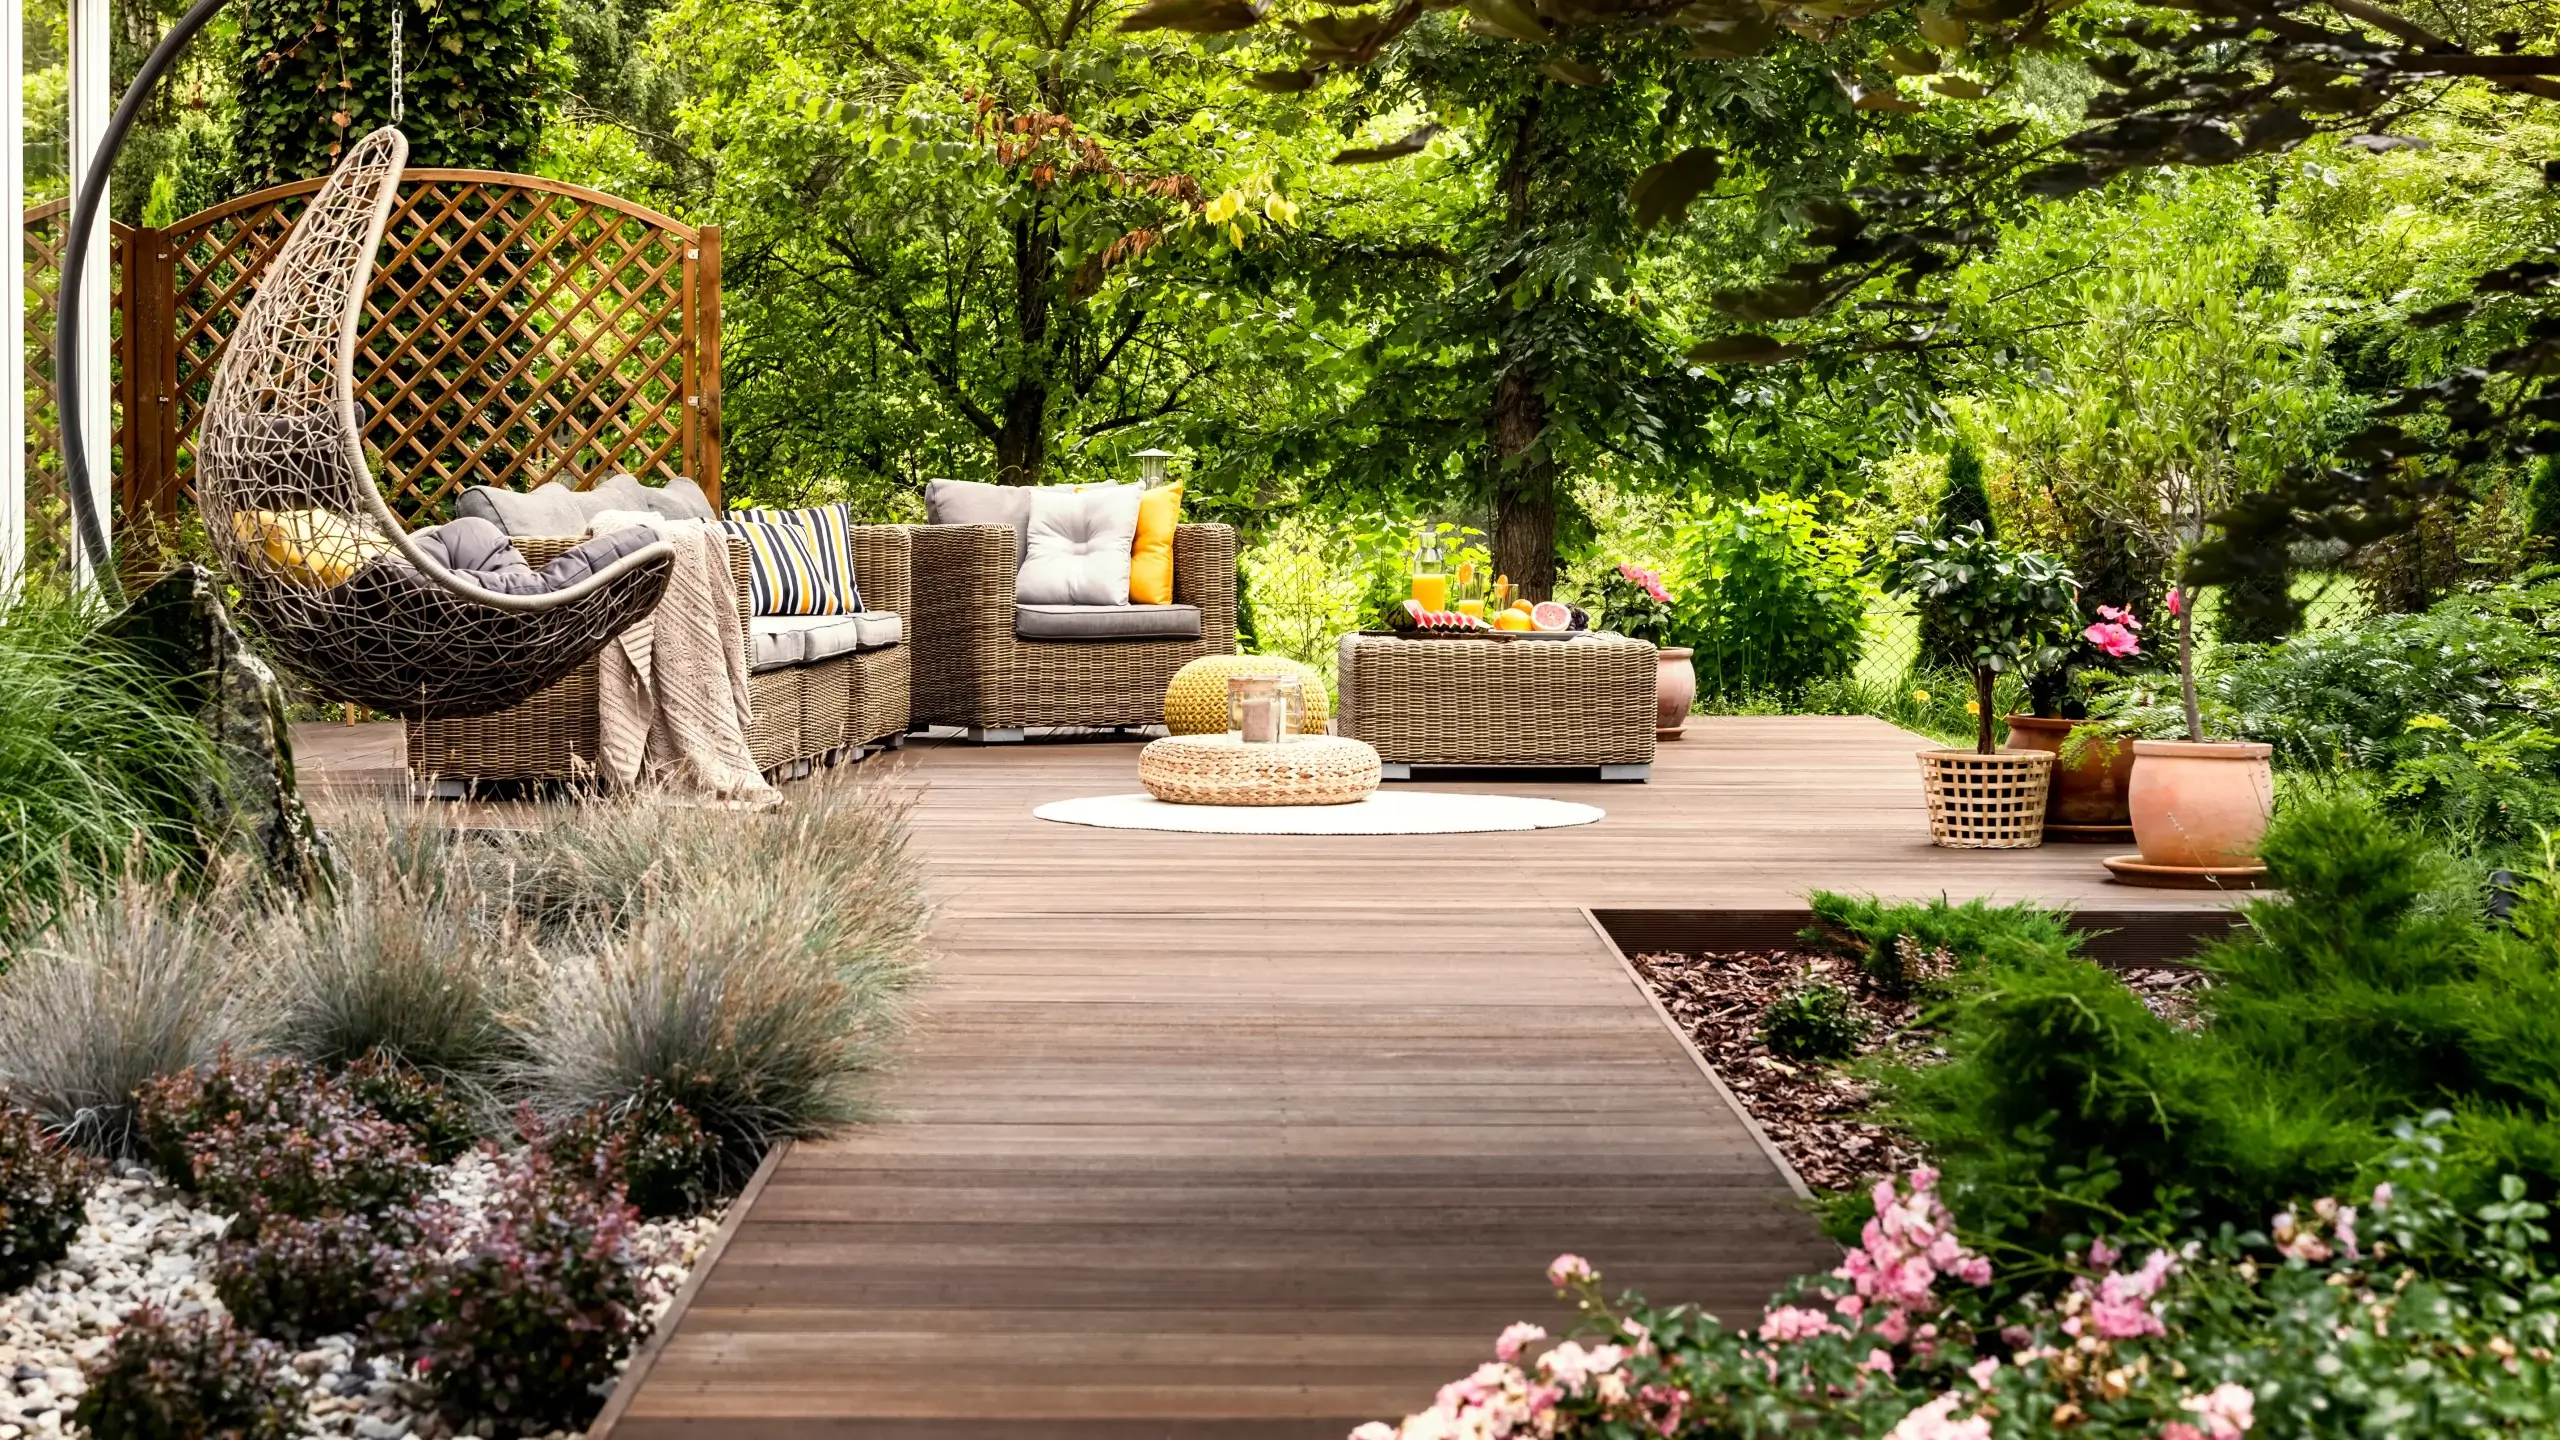 Give your Garden a Well Deserved Upgrade with these Tips!